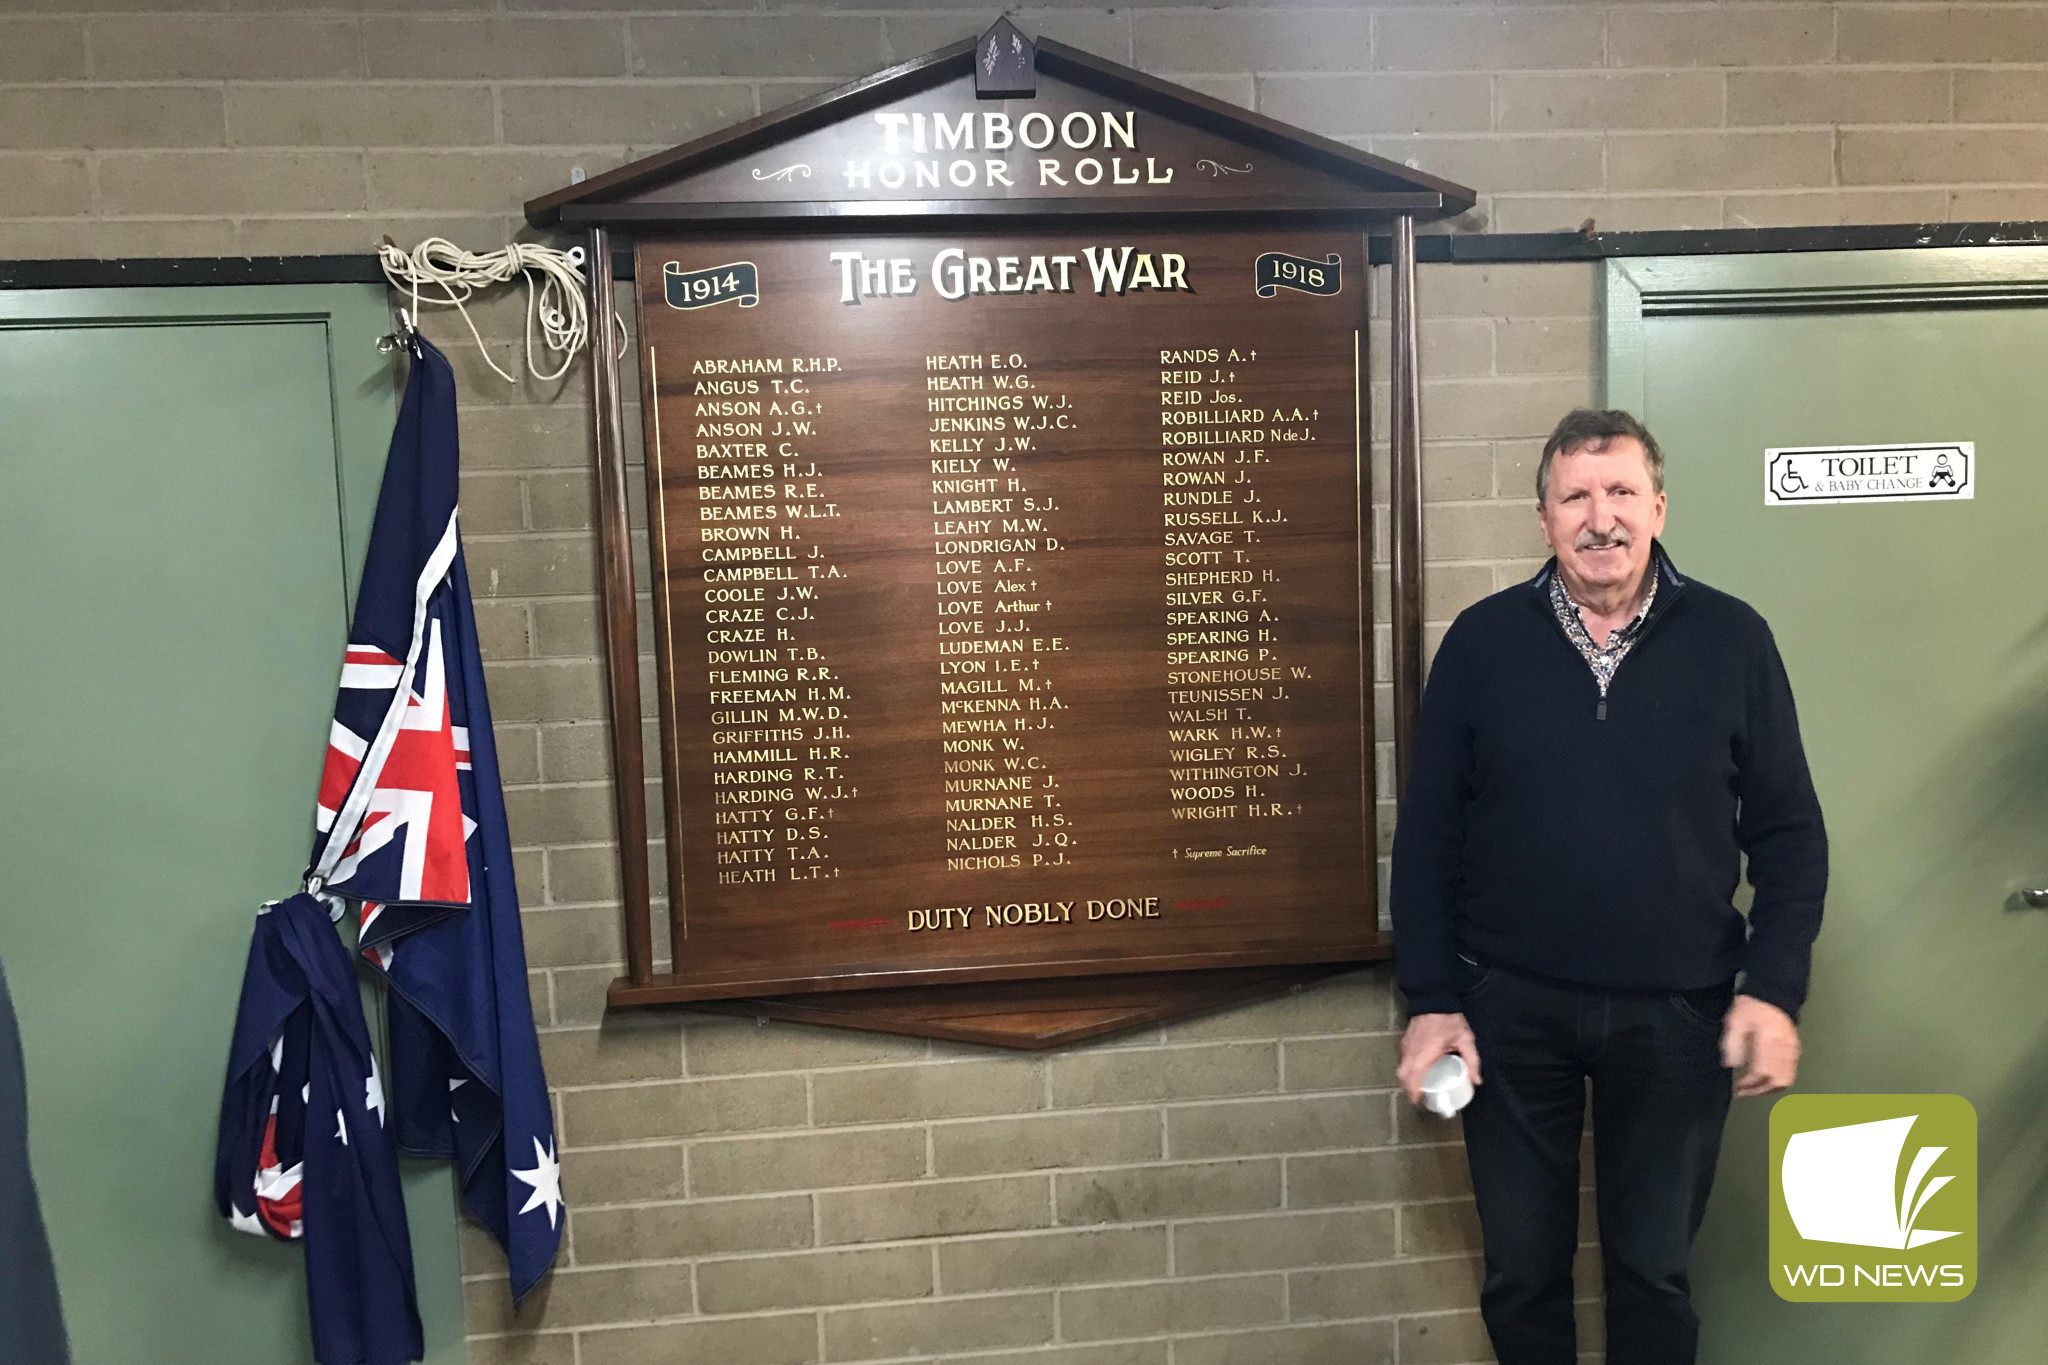 Paying tribute: Robert Marr, who built the replacement honor board for the Timboon hall, attended the unveiling earlier this month.